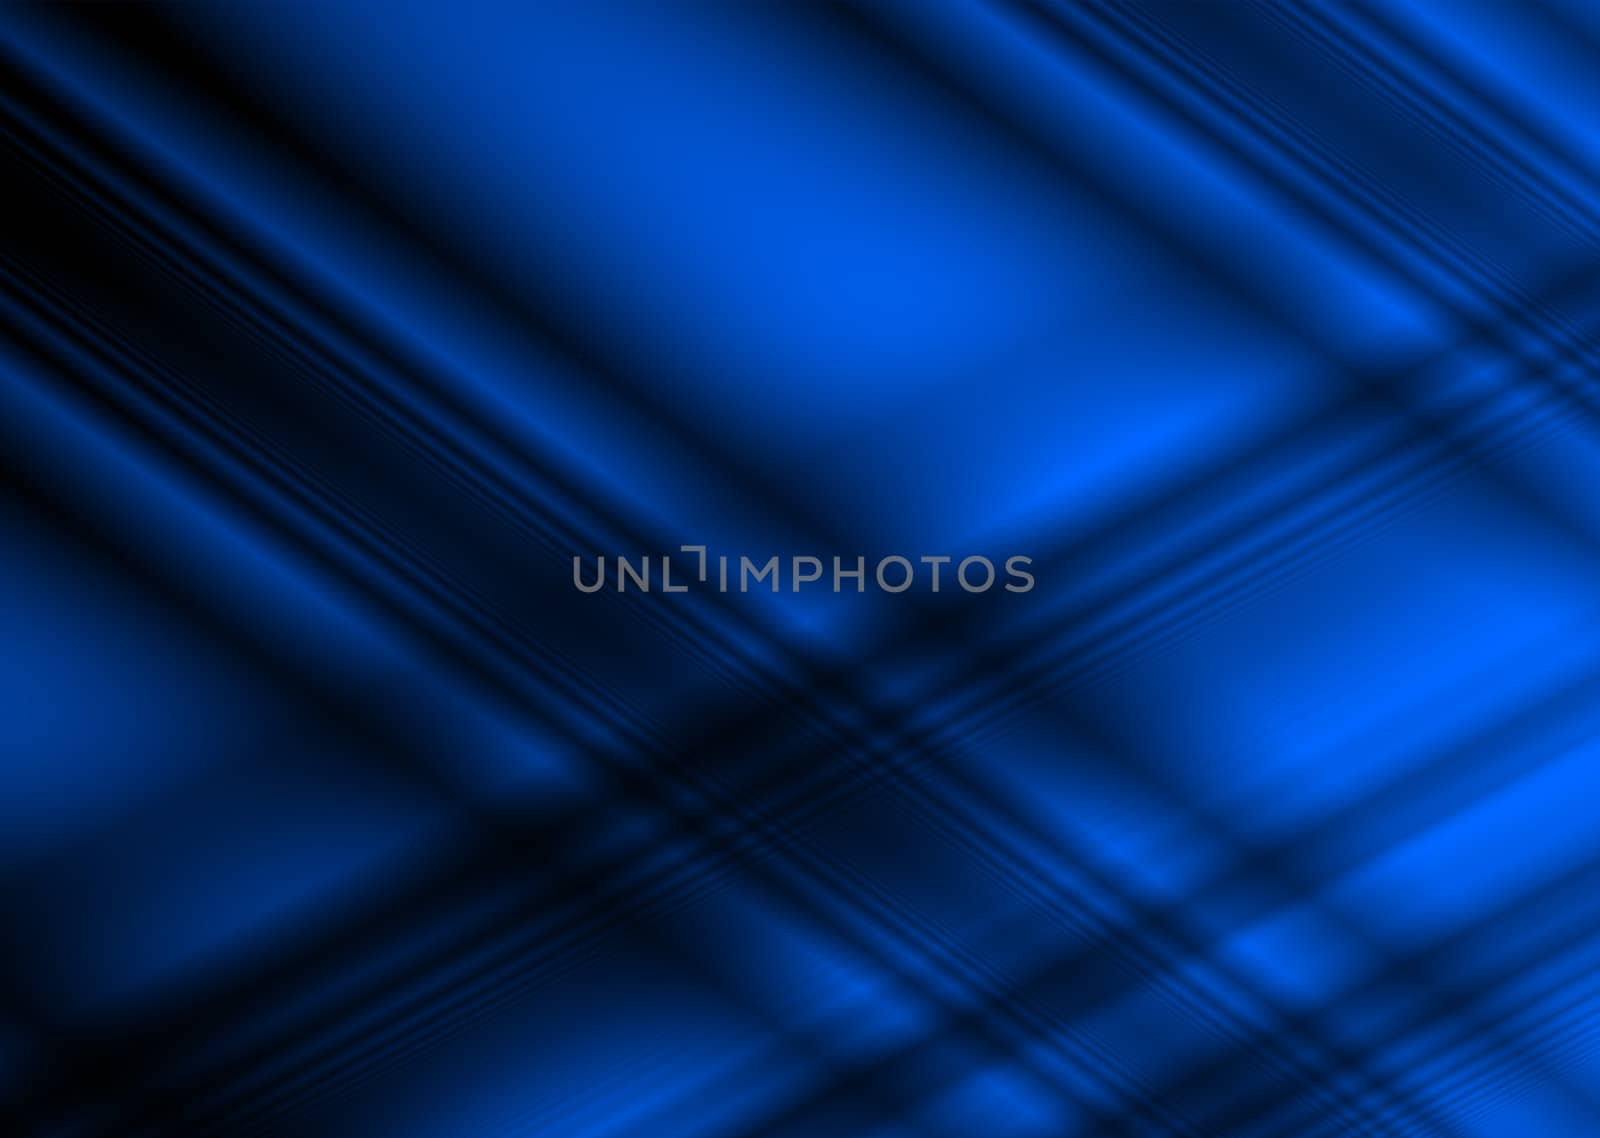 Abstract dark blue and black background image